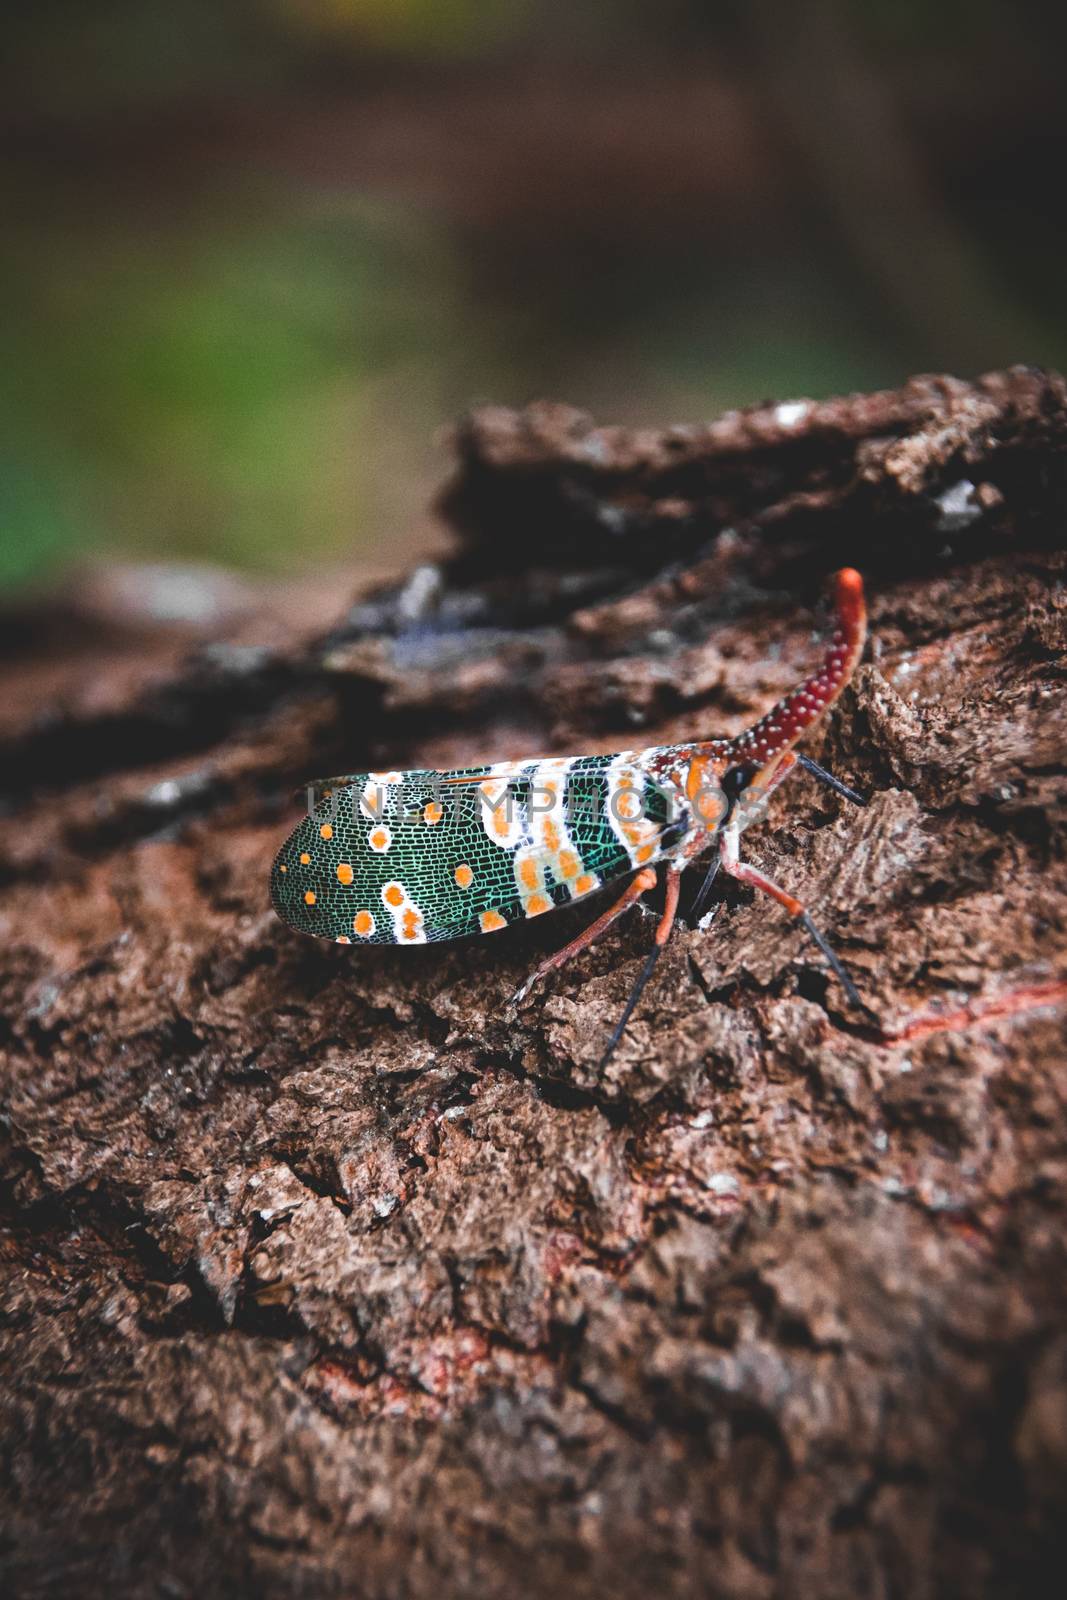 Pyrops candelaria lanternfly by Sonnet15